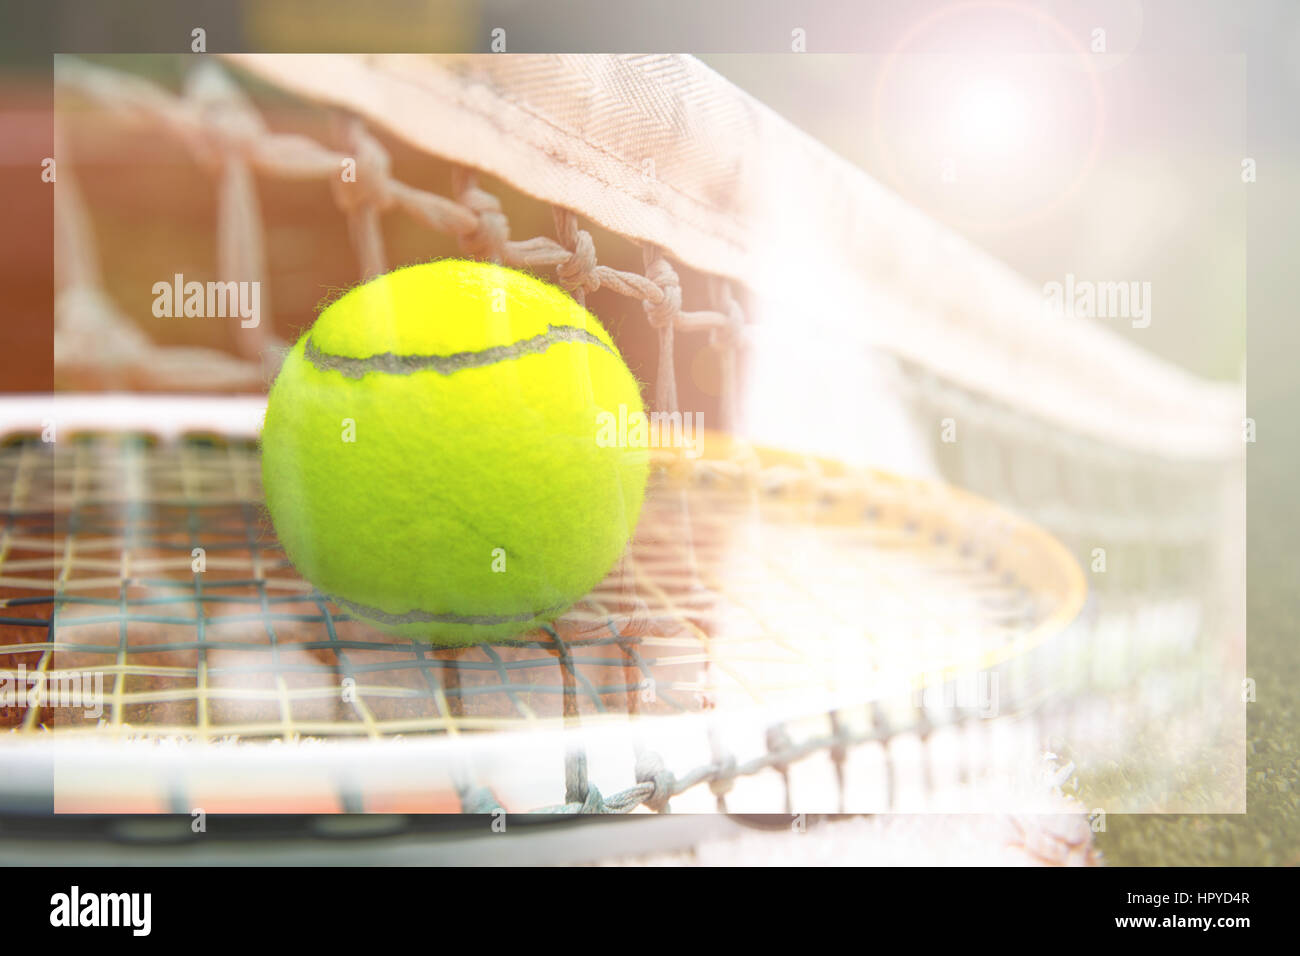 tennis ball and tennis racket on a tennis court with blurred background Stock Photo